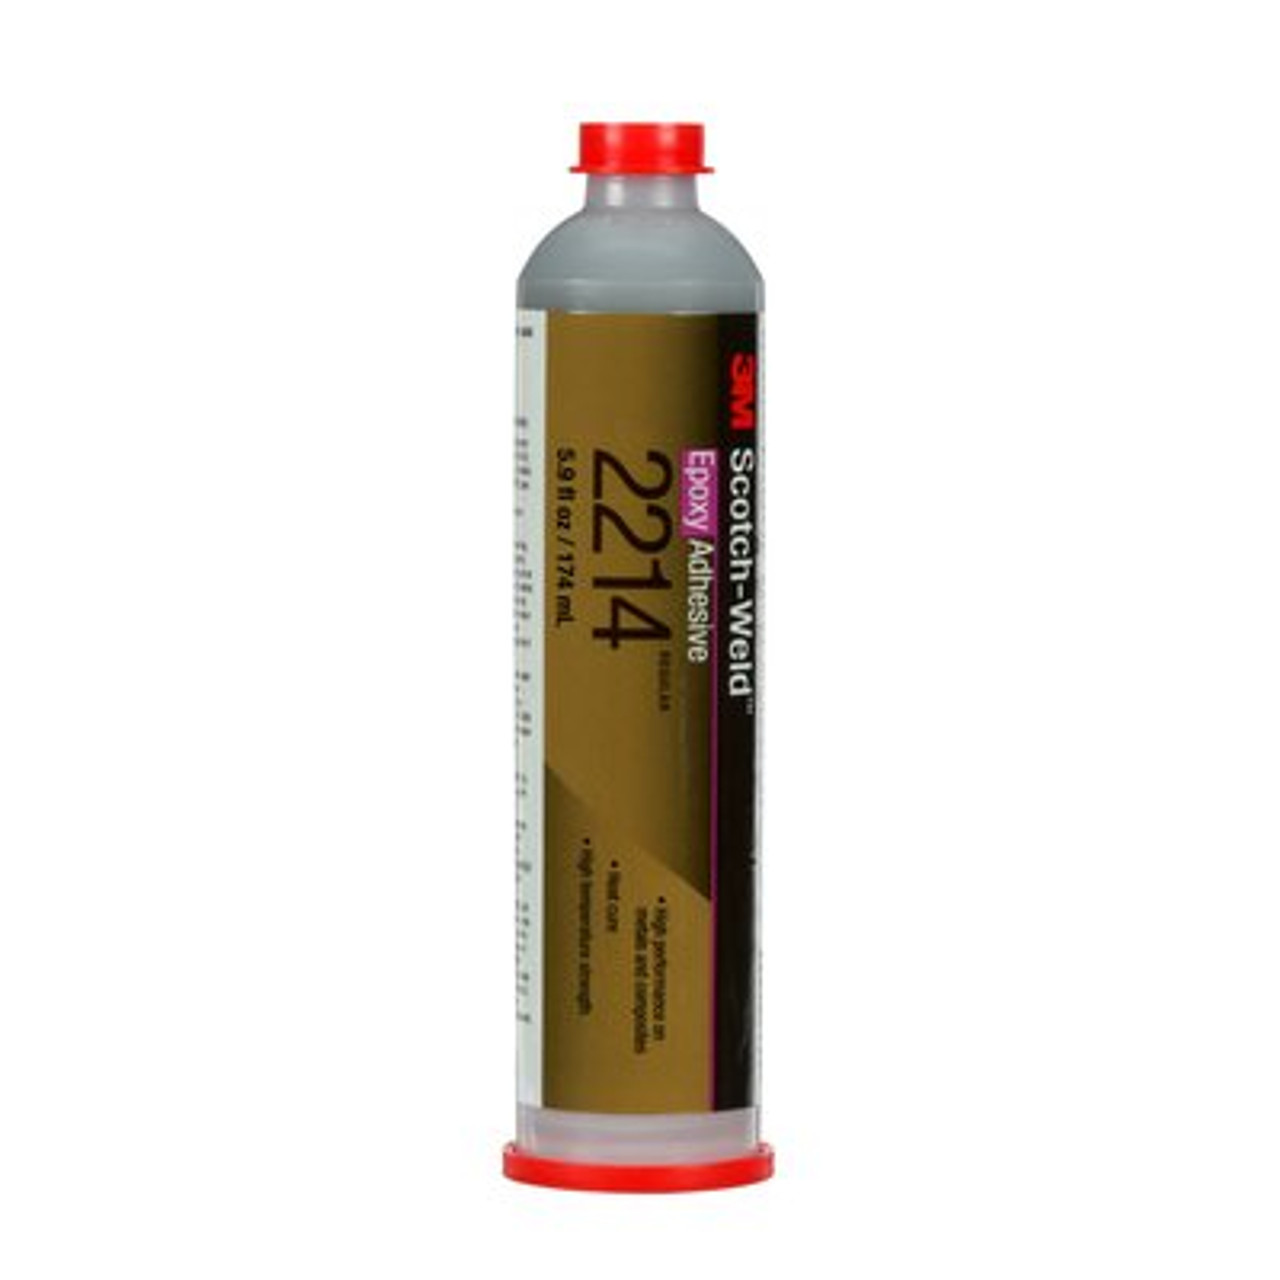 3M™ Scotch-Weld™ Epoxy Adhesive 2214 Regular, Gray, 6 fl oz Cartridge *NON RETURNABLE ITEM. ADDITIONAL SURCHARGE APPLIES TO THIS ITEM. CHARGE WILL NOT SHOW ON INITIAL CONFIRMATION. SEE PRODUCT DESCRIPTION FOR MORE INFO*